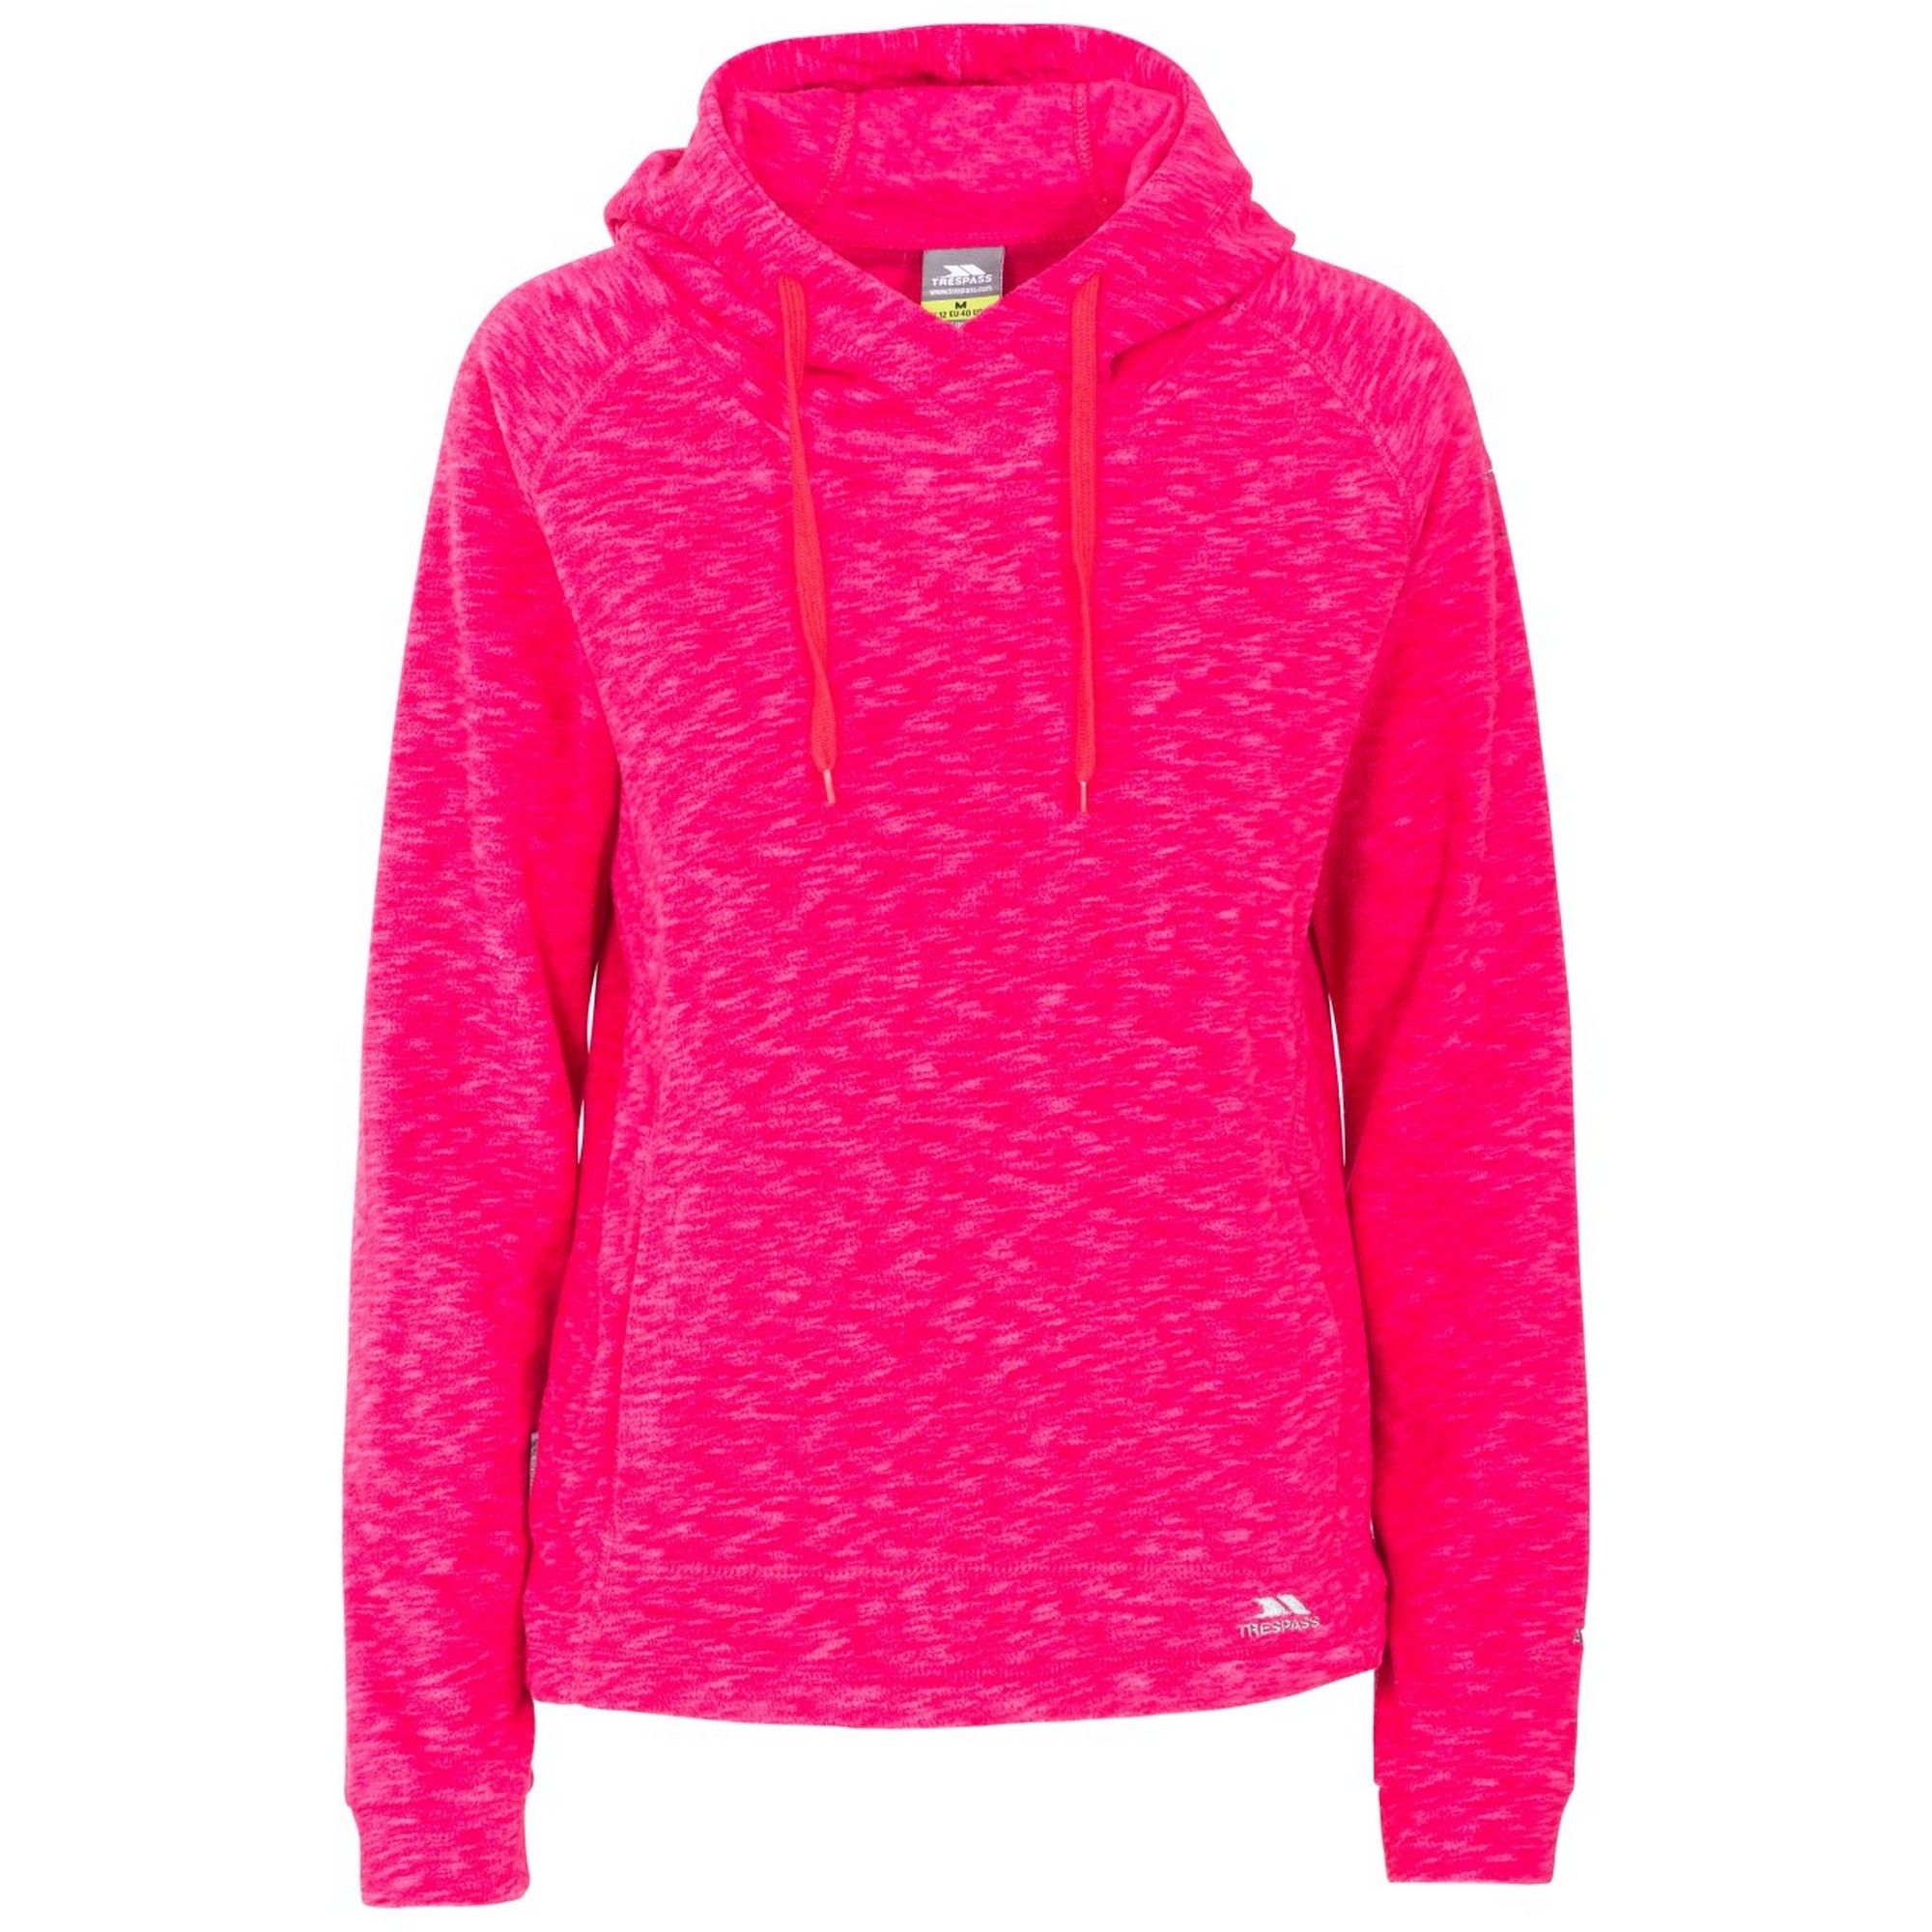 Ladies pullover fleece hoodie. 210gsm Airtrap fleece build to trap and hold onto body heat. Grown on hood. Tie neck adjusters. 2 front pockets. 100% Polyester. Size (Dress Size and Chest to fit, ins) - S: 8-10, 32.5-35, M: 10-12, 35.5-38, L: 12-14, 39-42, XL: 16-18, 42.5-47.